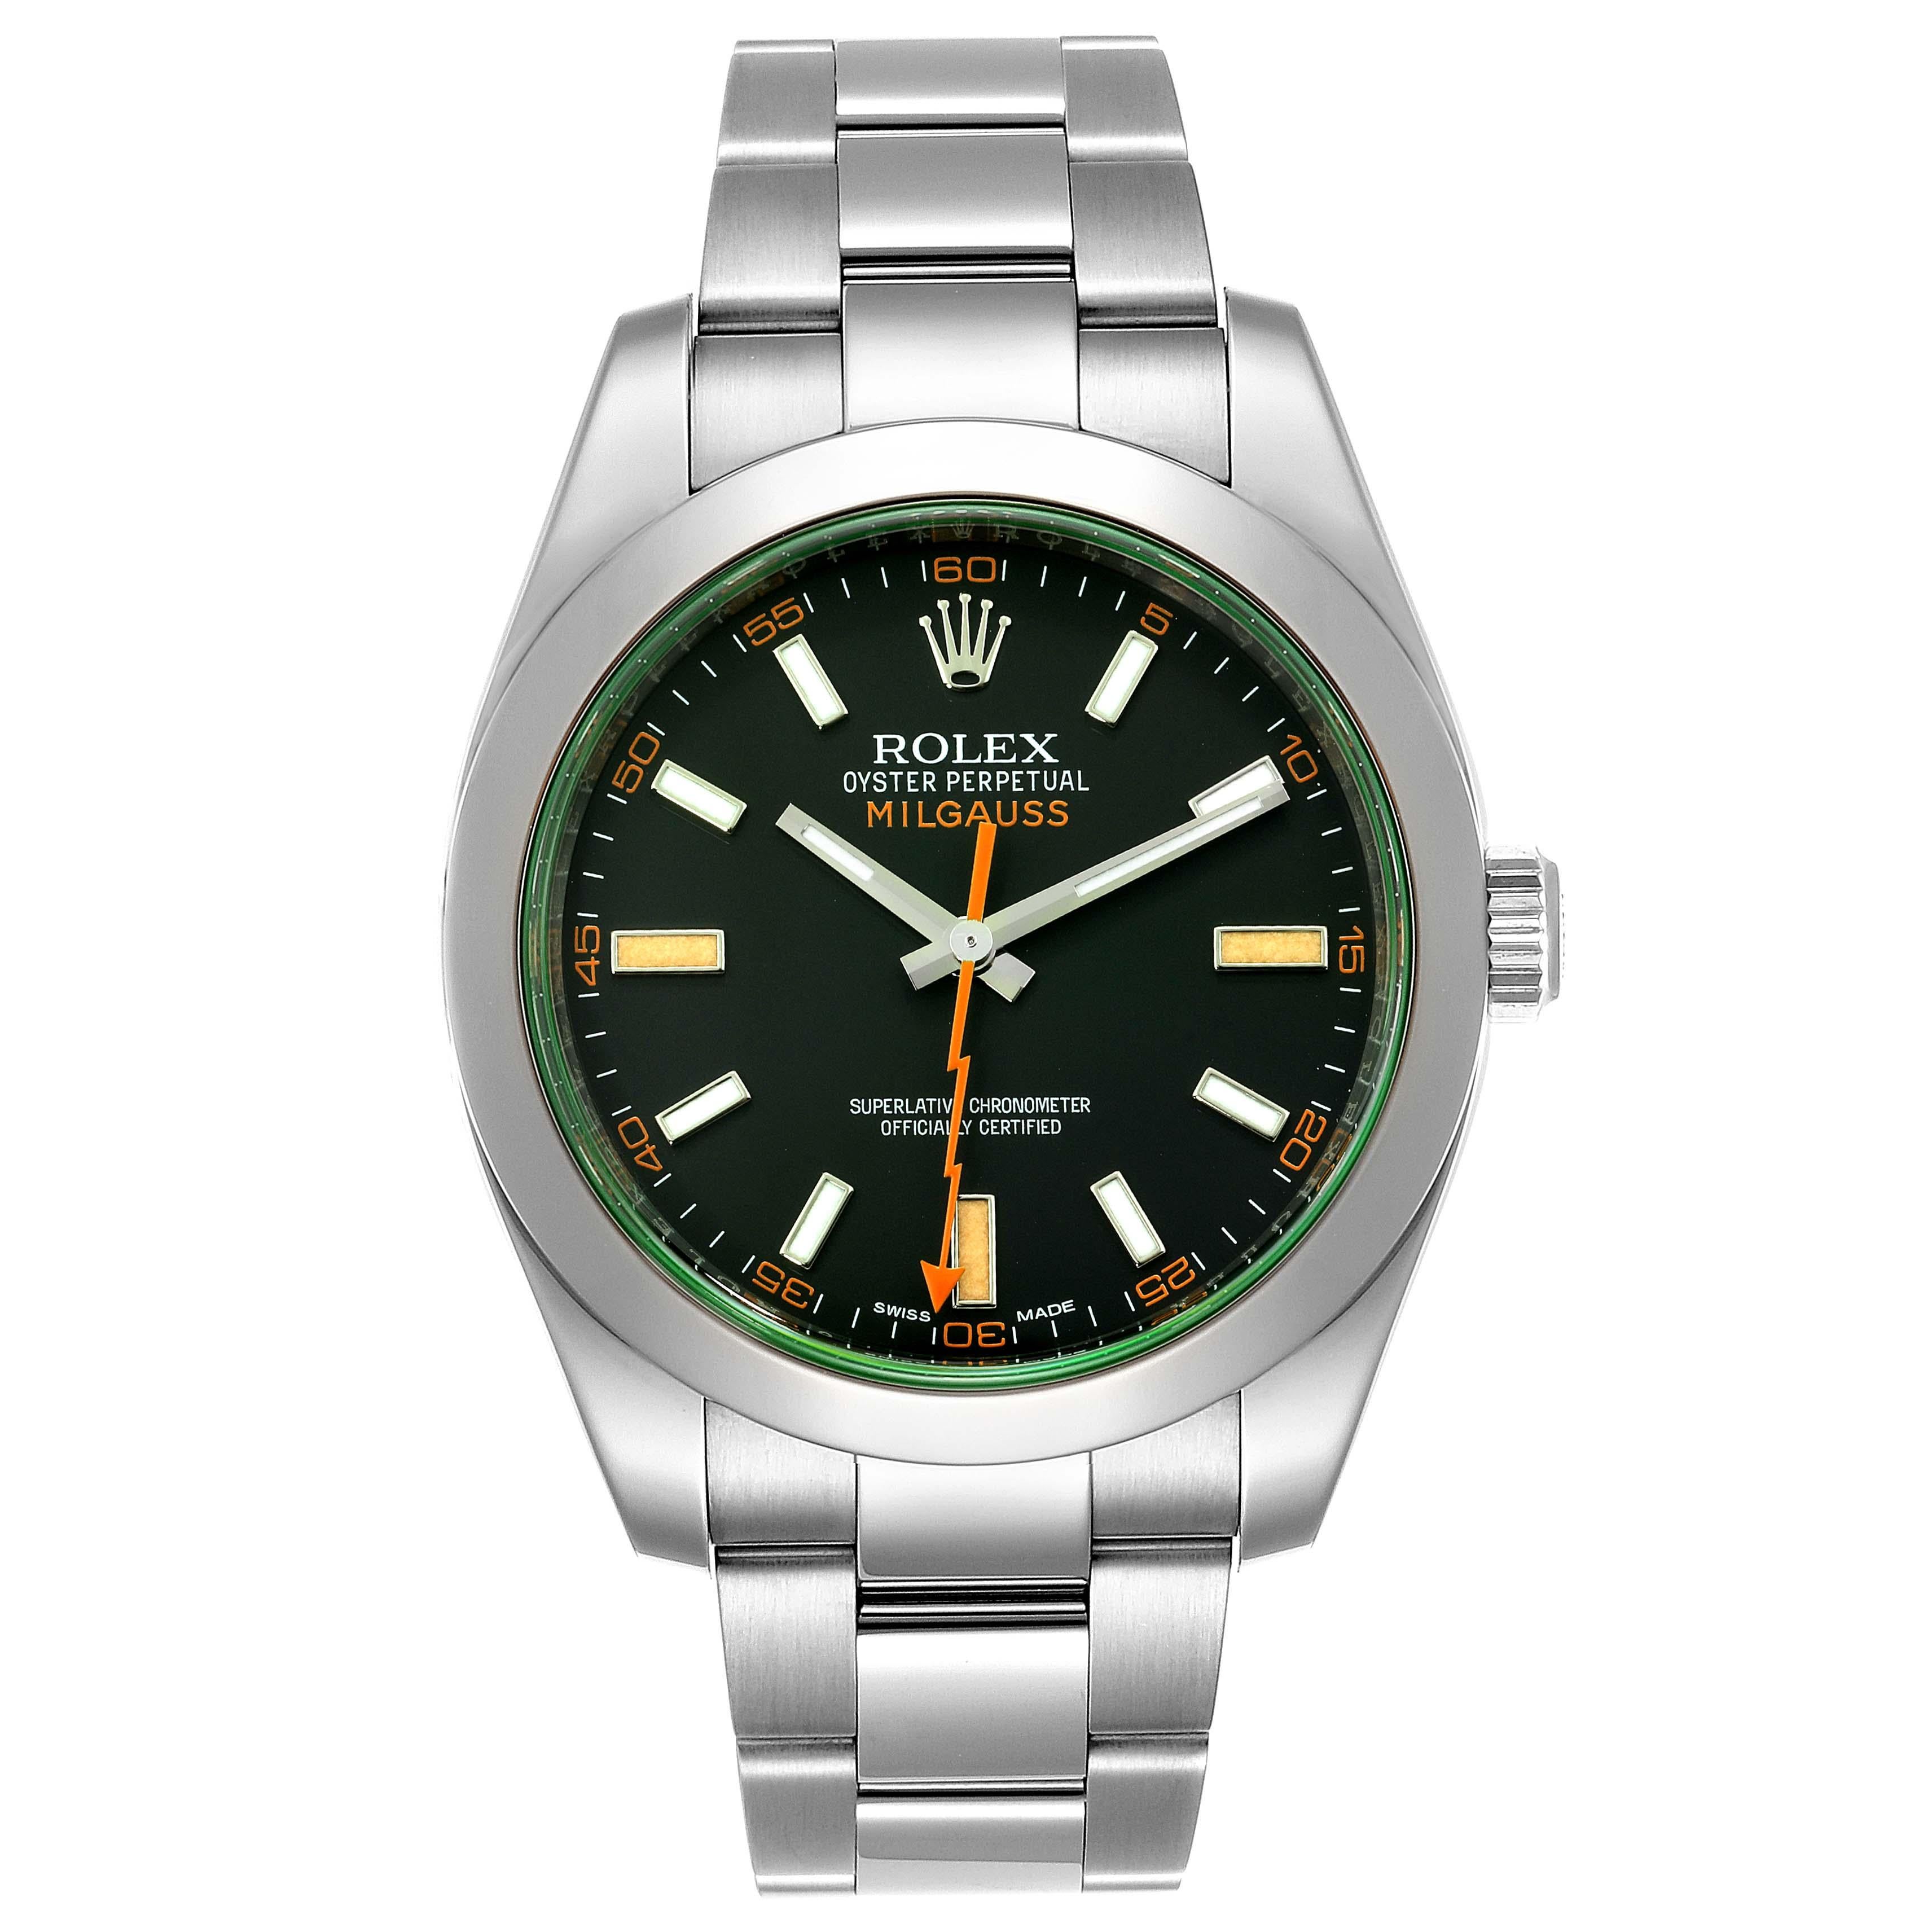 Rolex Milgauss Black Dial Green Crystal Steel Mens Watch 116400V Box Card. Officially certified chronometer self-winding movement. Stainless steel case 40.0 mm in diameter. Stainless steel fixed smooth domed bezel. Scratch resistant green sapphire